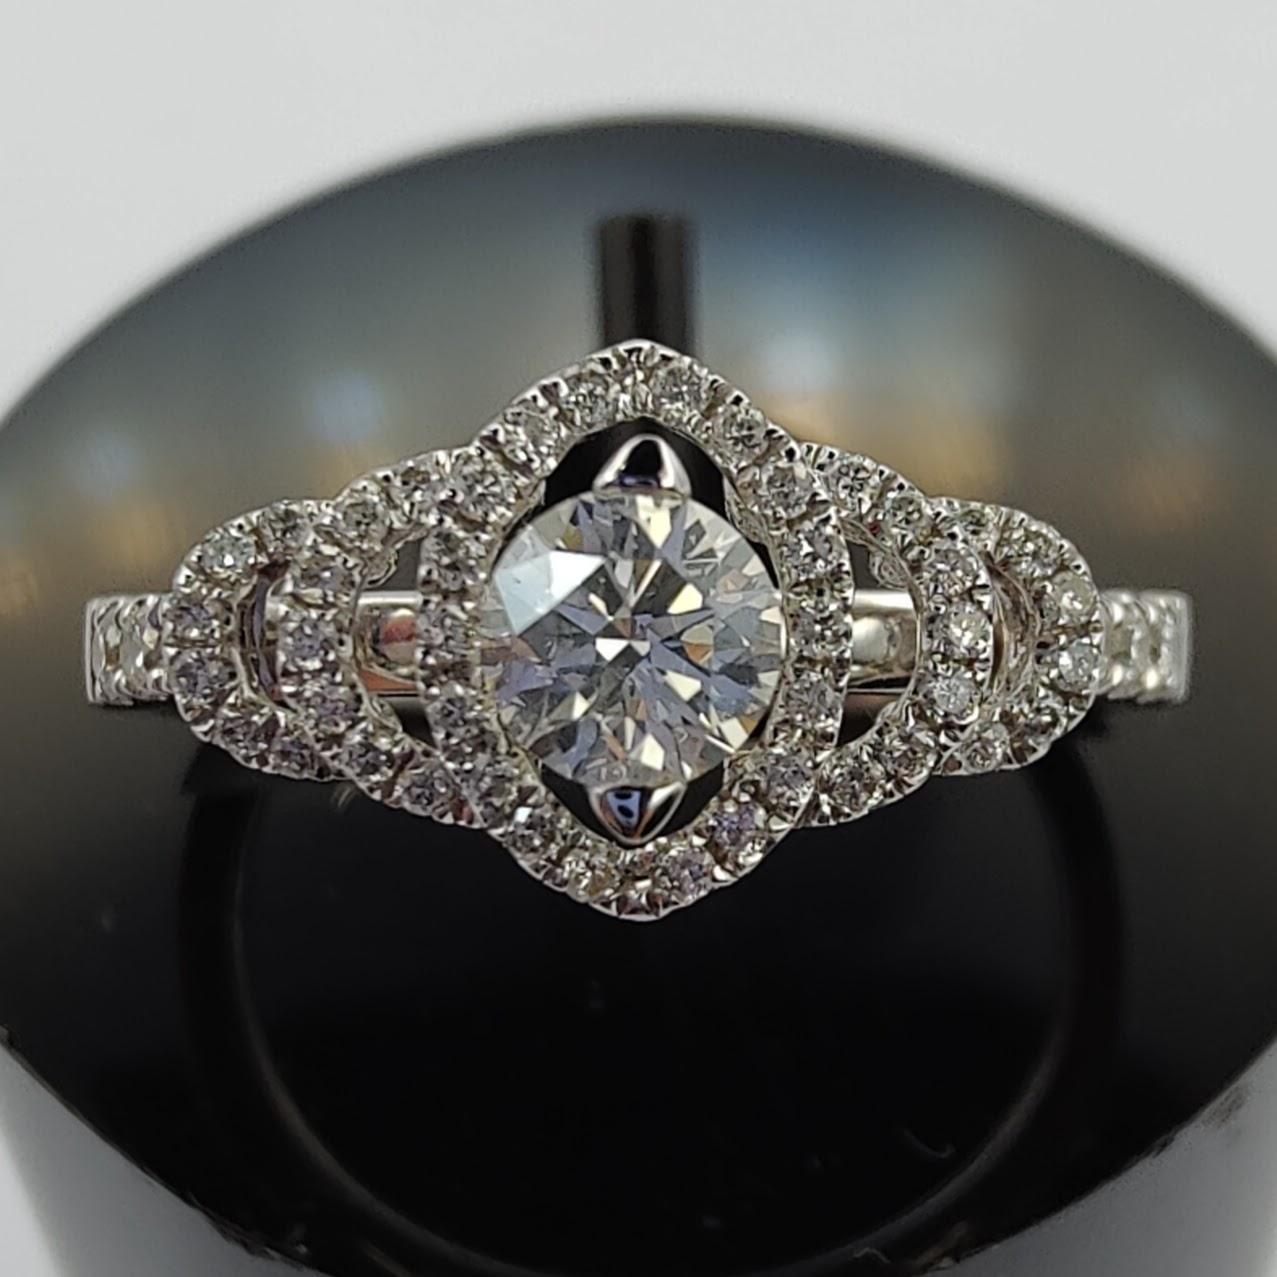 This stunning GIA certified diamond engagement ring is the perfect choice for your special day. The ring features a sparkling 0.61 carat round cut diamond set in a bridal cluster design, surrounded by three halos of smaller diamonds. The ring is